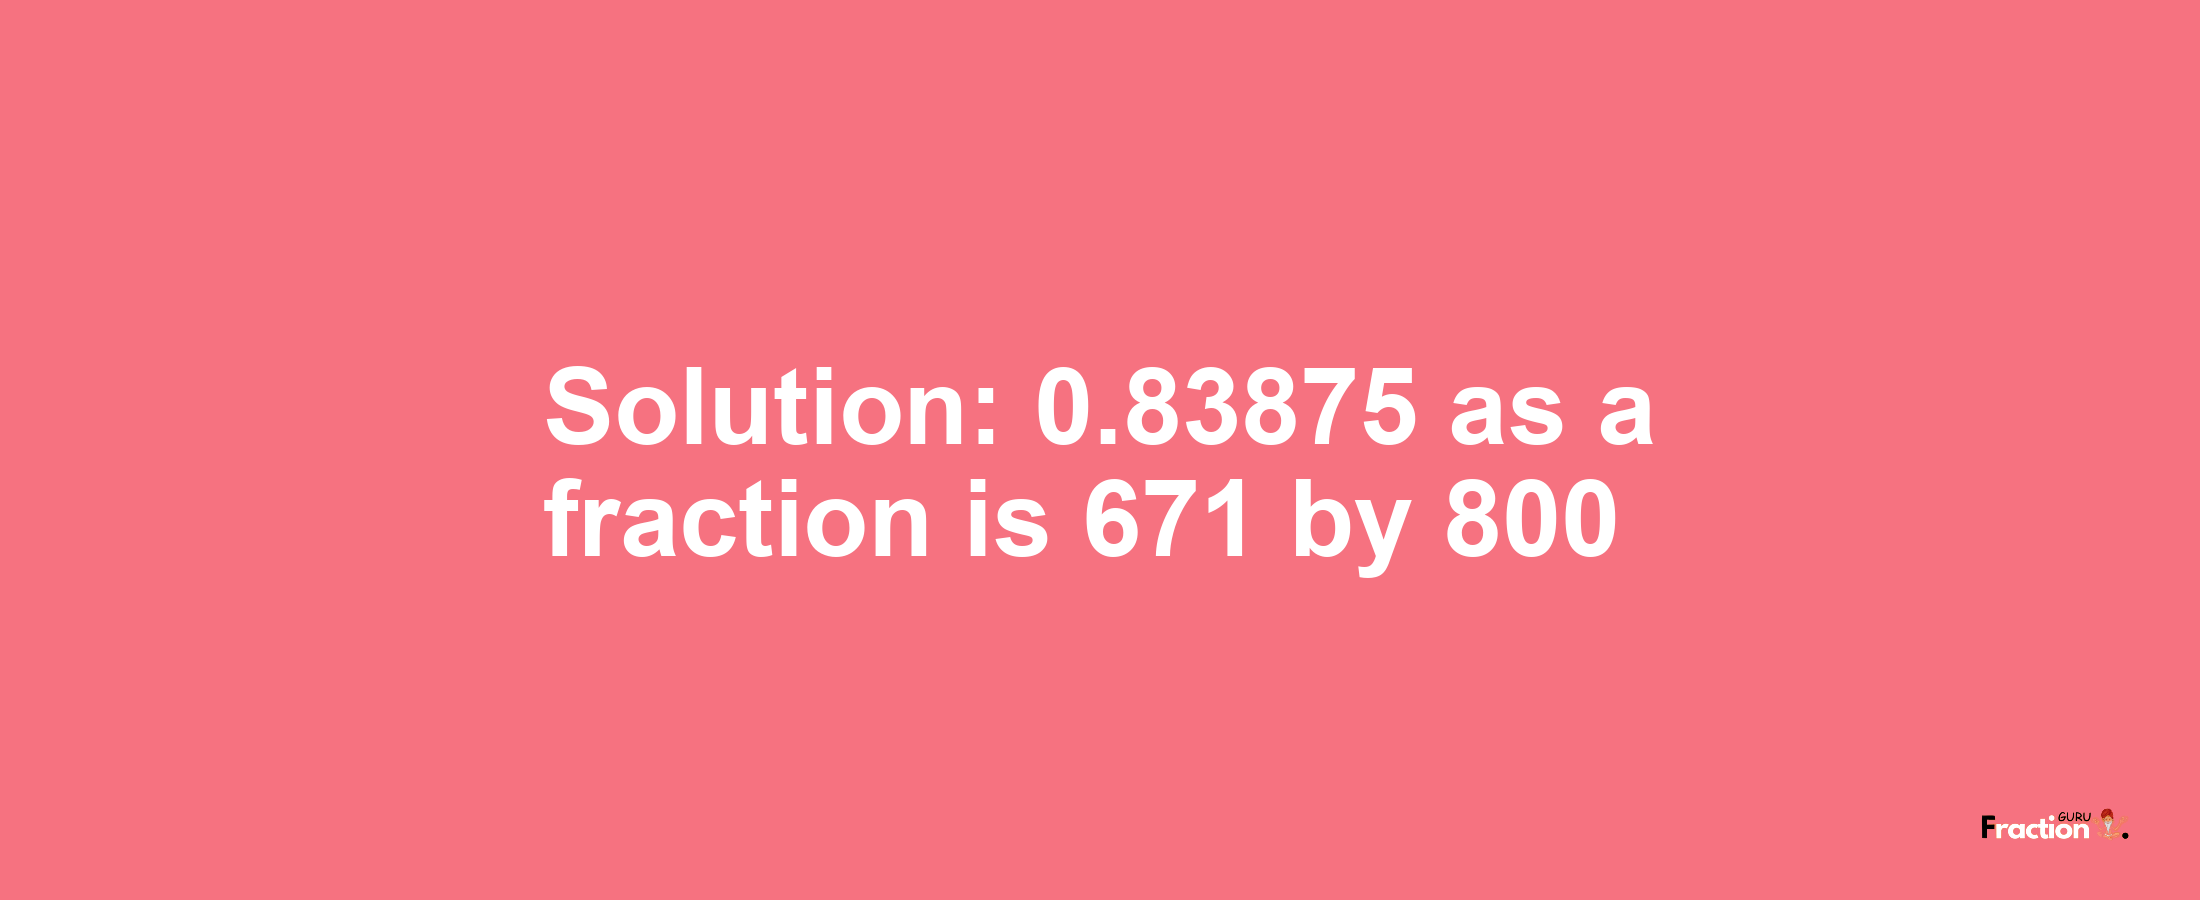 Solution:0.83875 as a fraction is 671/800